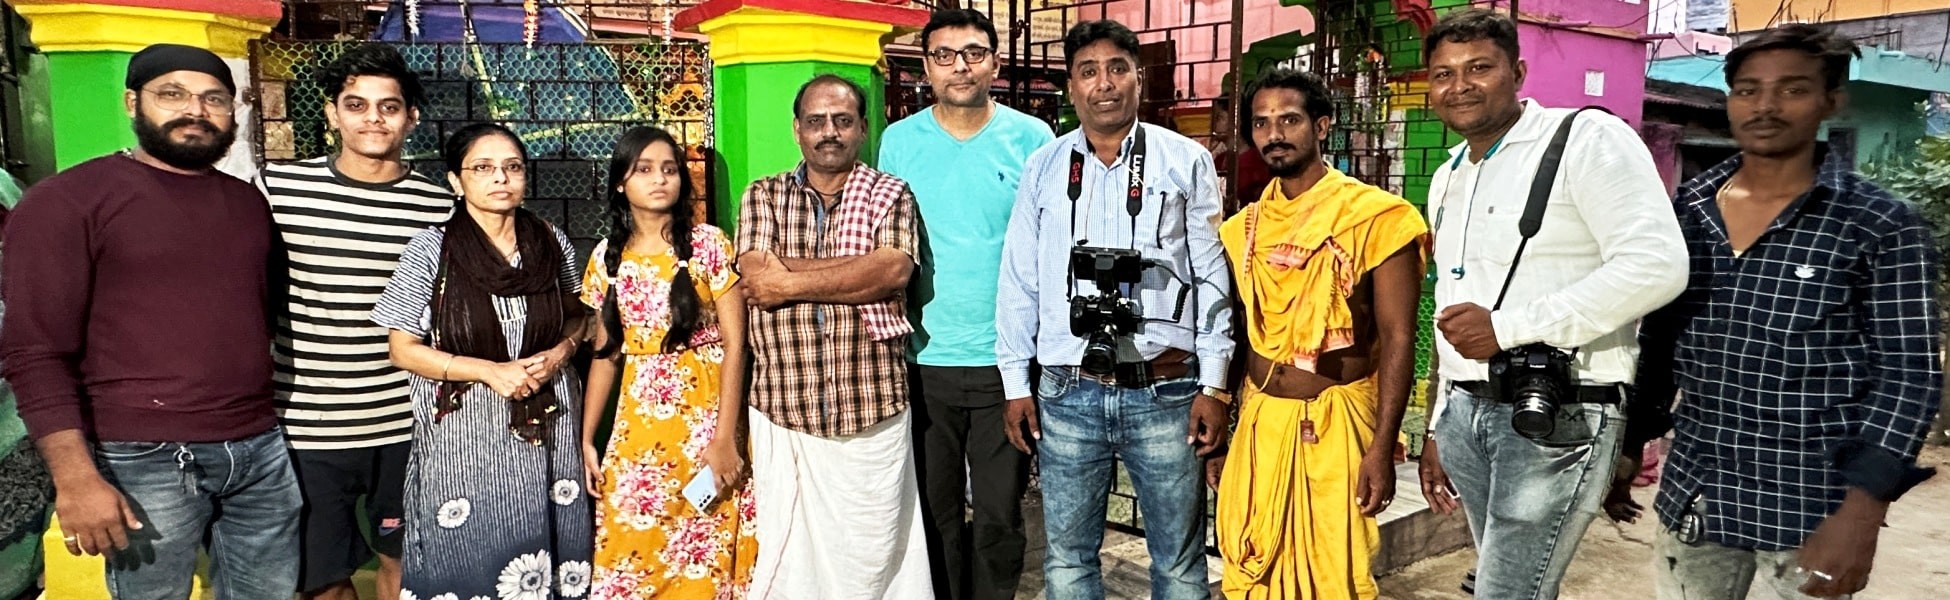 film shooting locations in india, video shooting locations in india, tv shooting locations in india, shooting locations in india